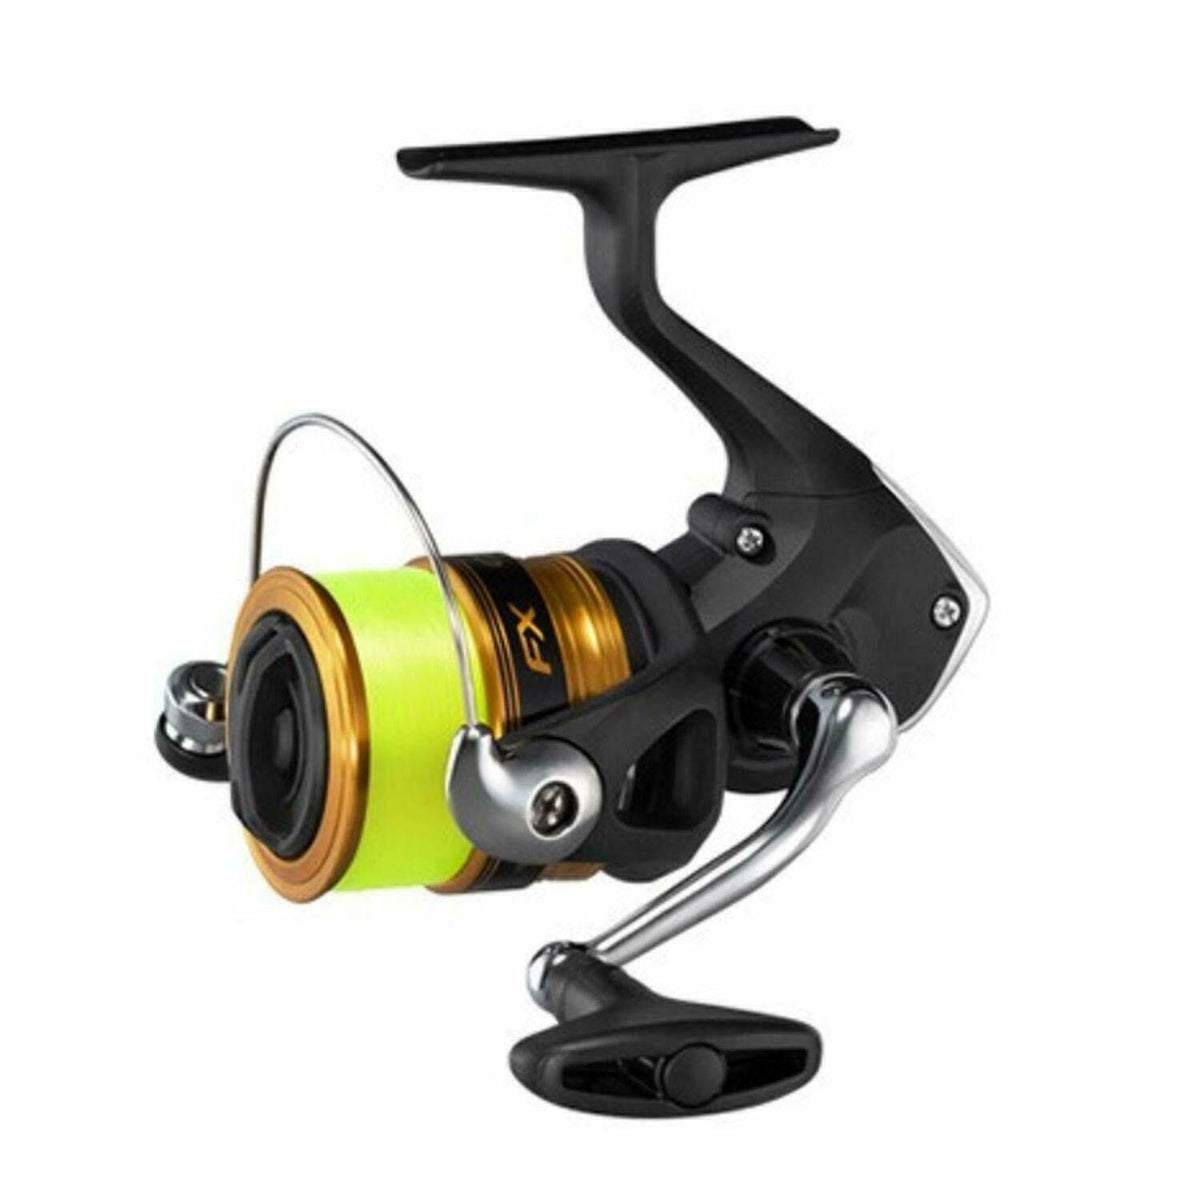 Shimano FX SPINNING FISHING REEL With Line